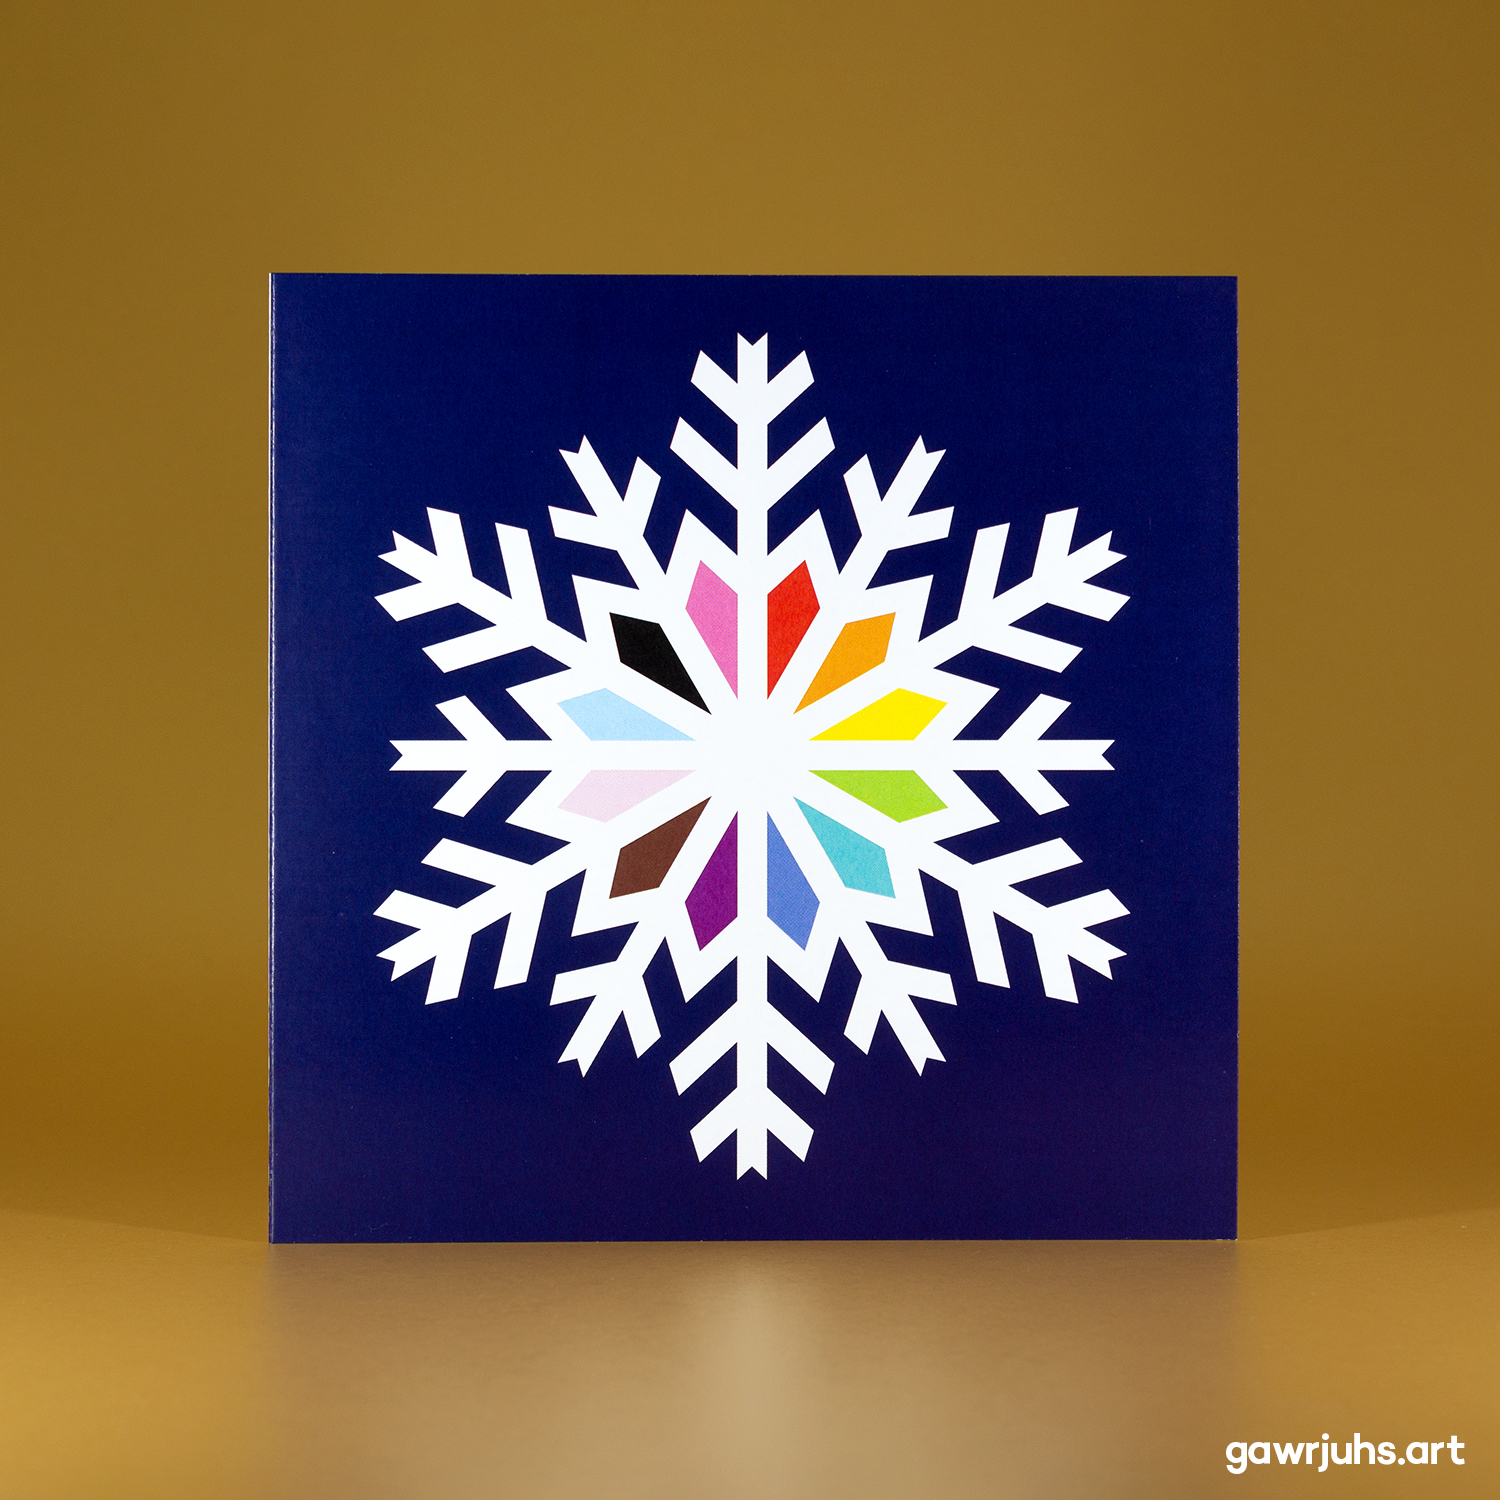 snowflake-pride-gold-background-1500px